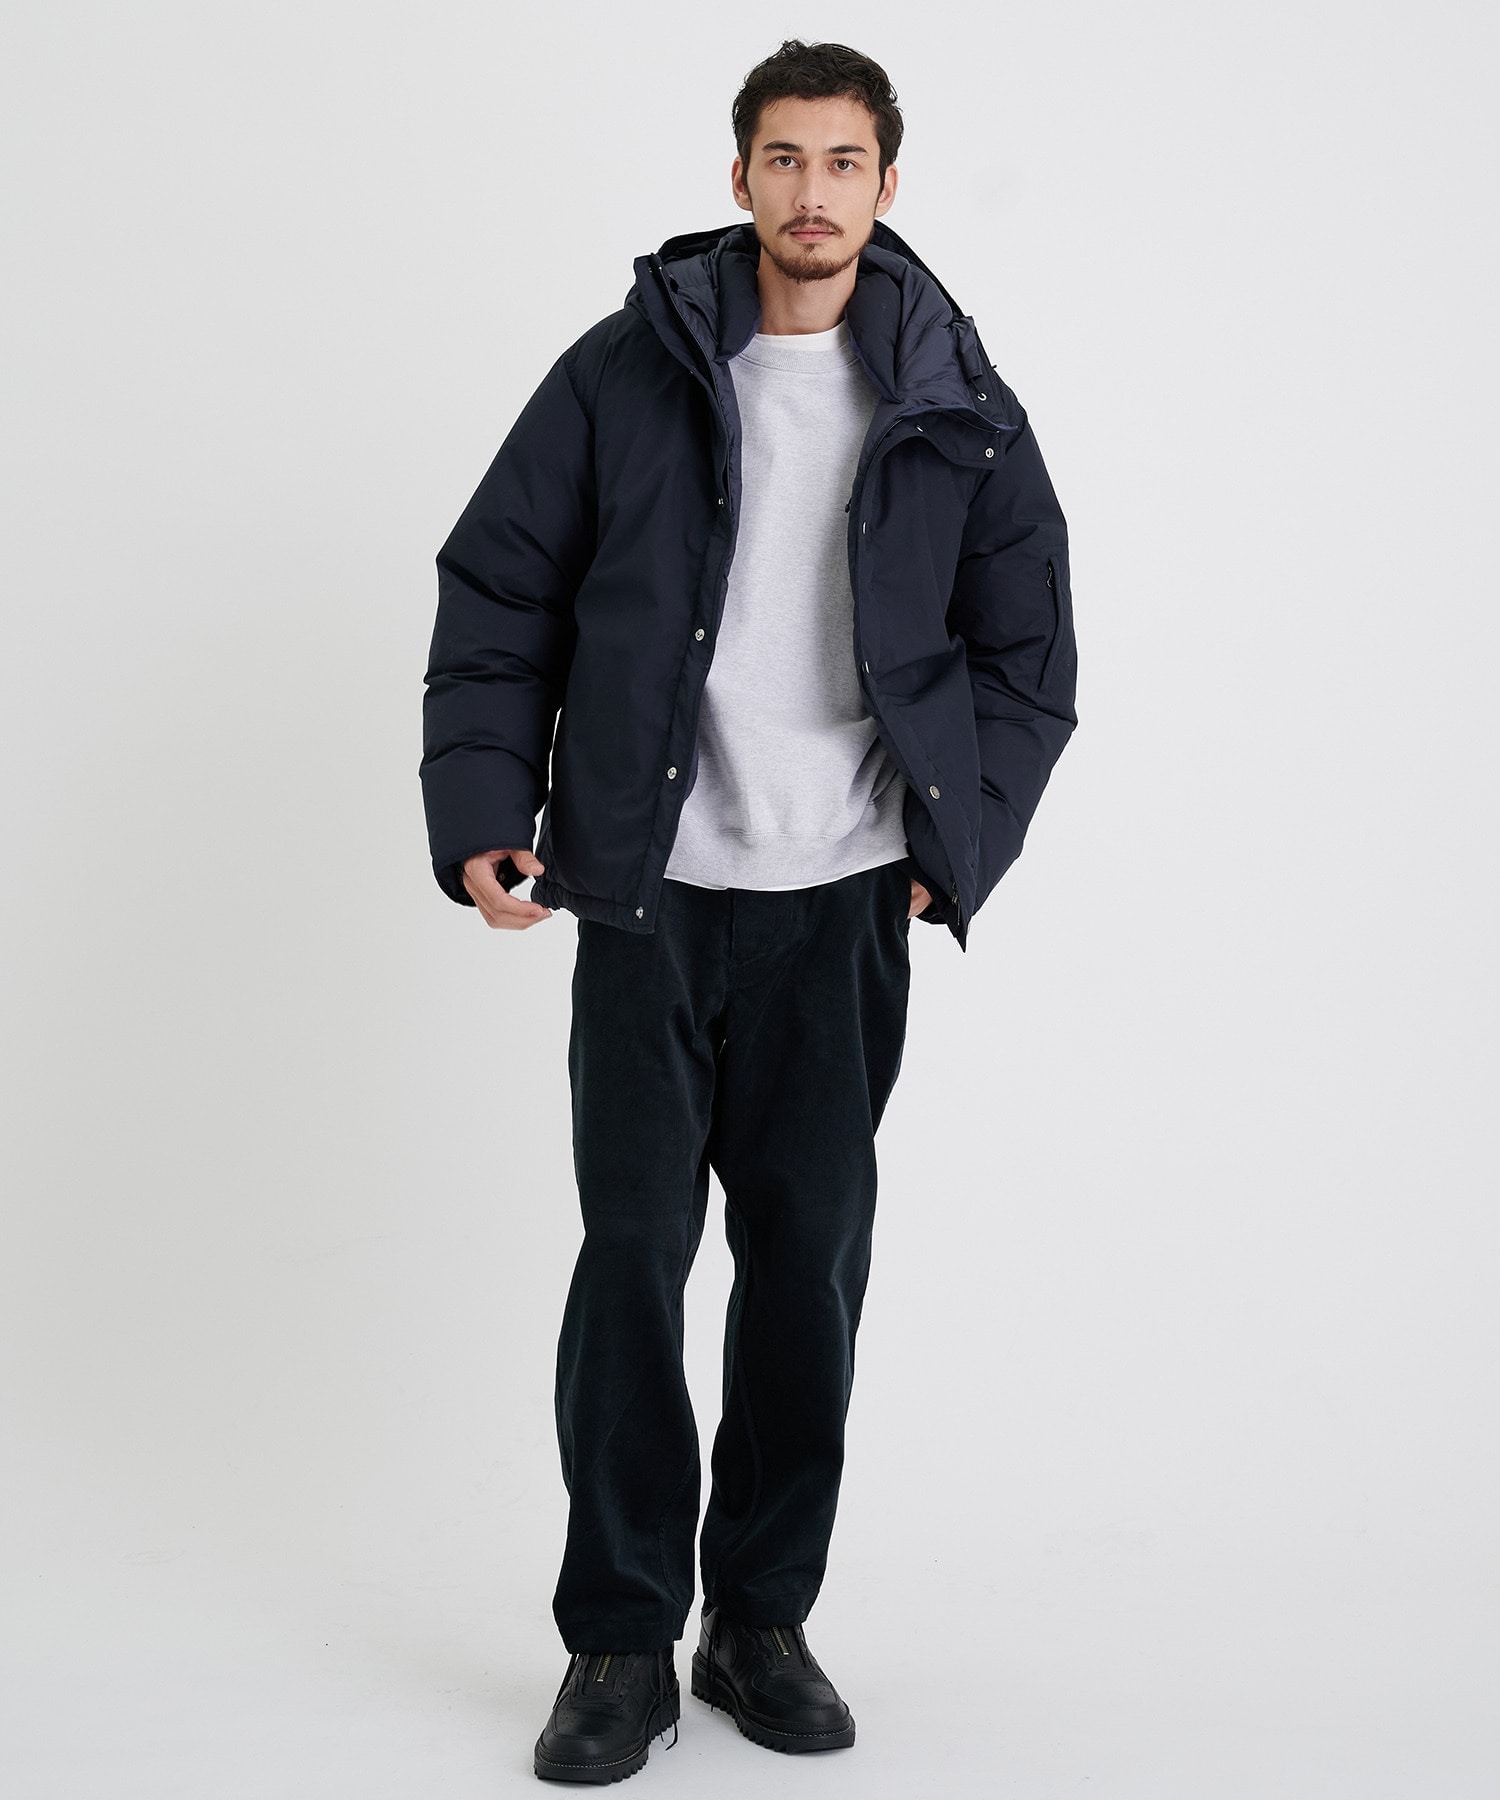 Corduroy Wide Tapered Field Pants THE NORTH FACE PURPLE LABEL